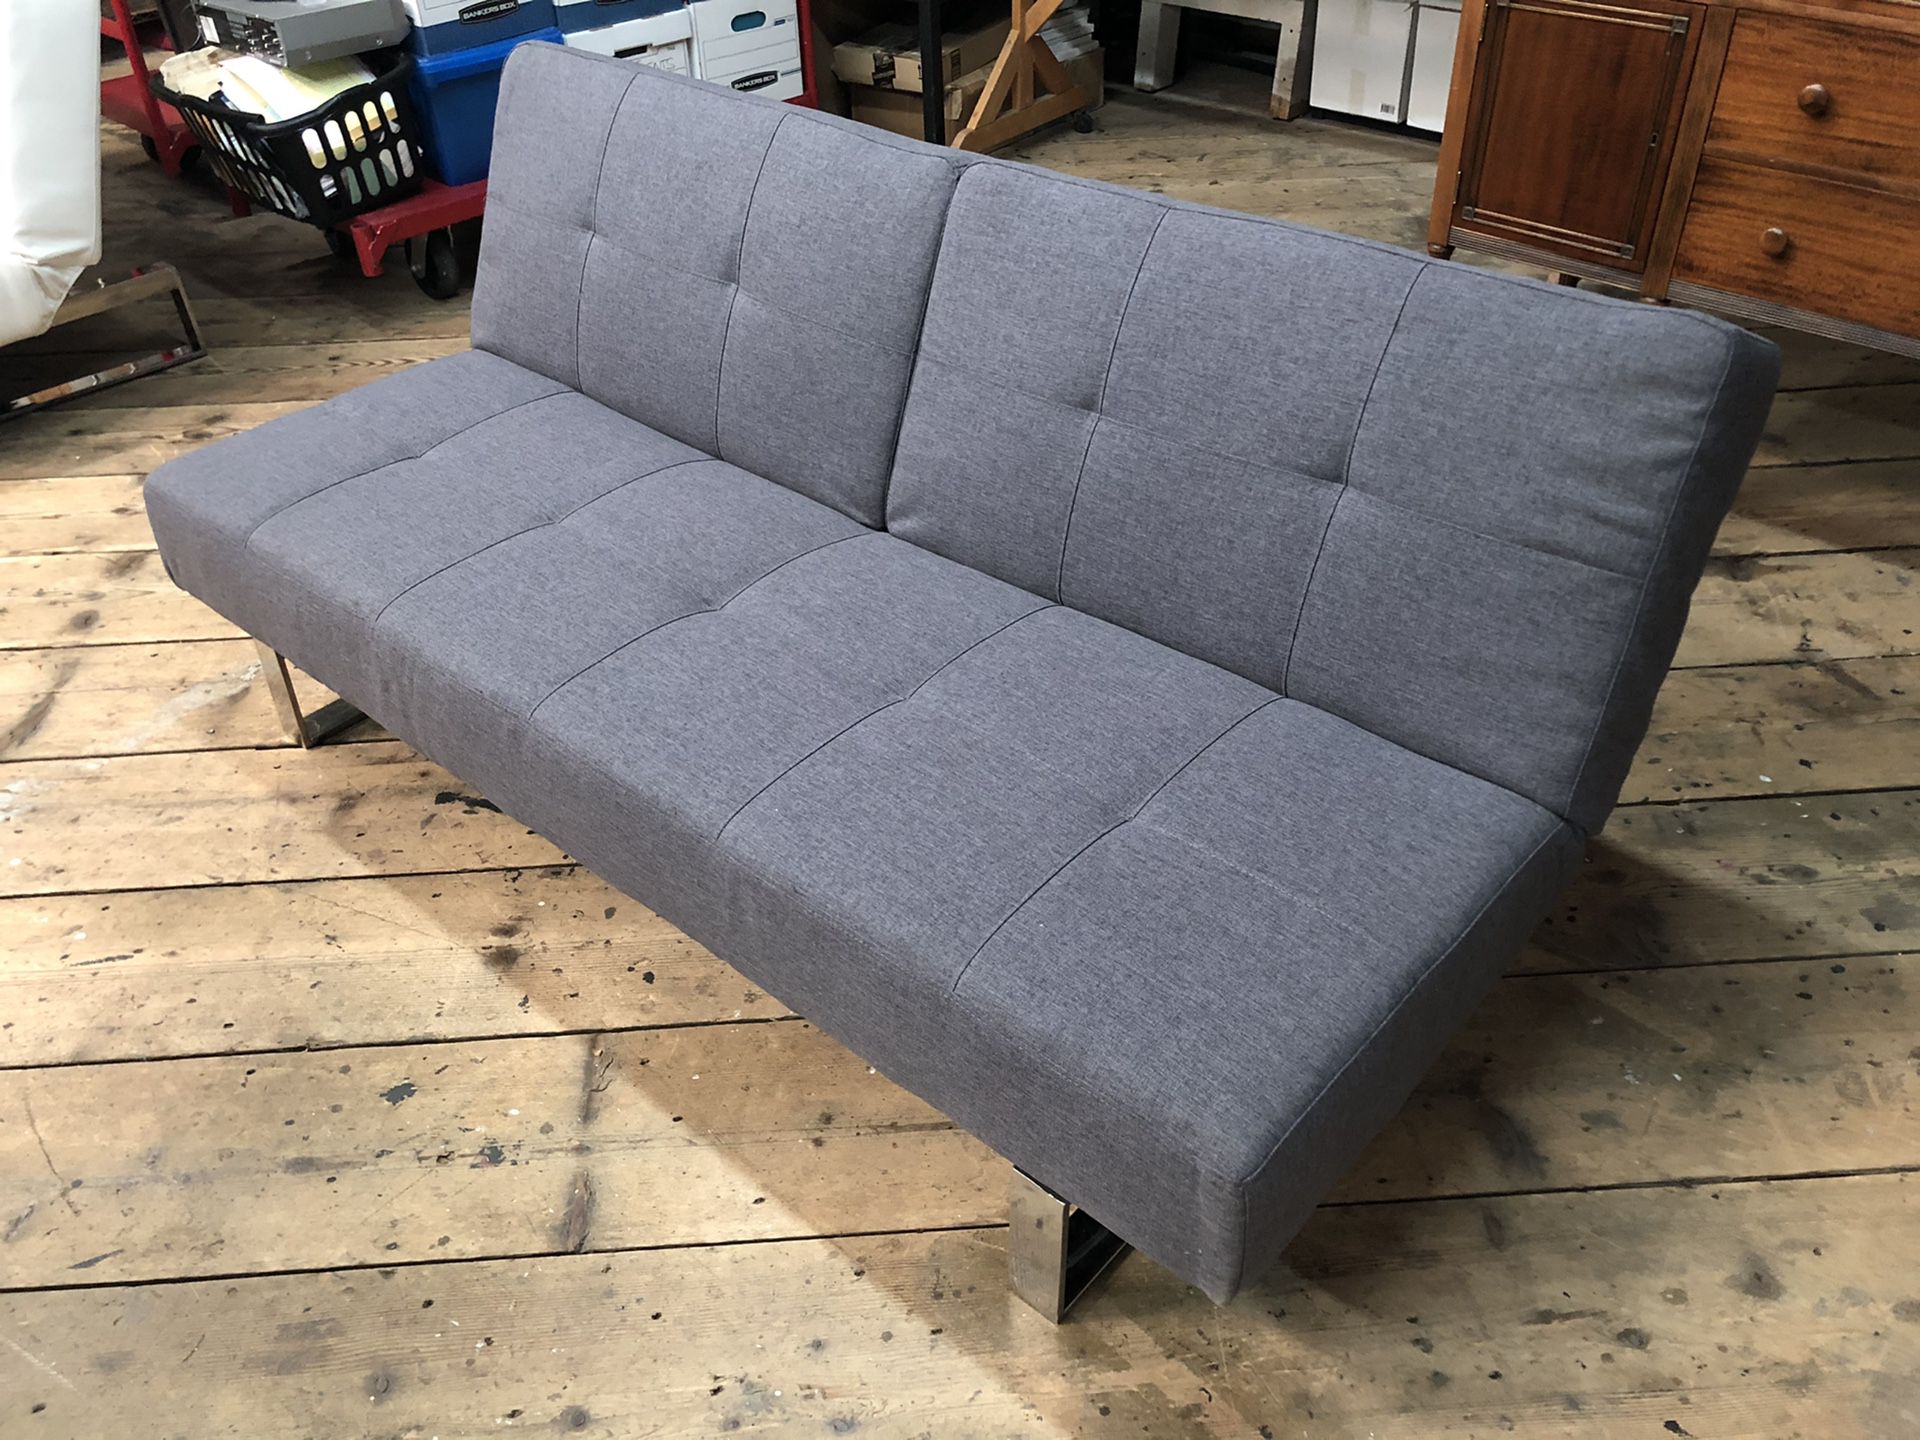 1 of 3, Grey Futon, Small Sofa, Couch, Adjustable